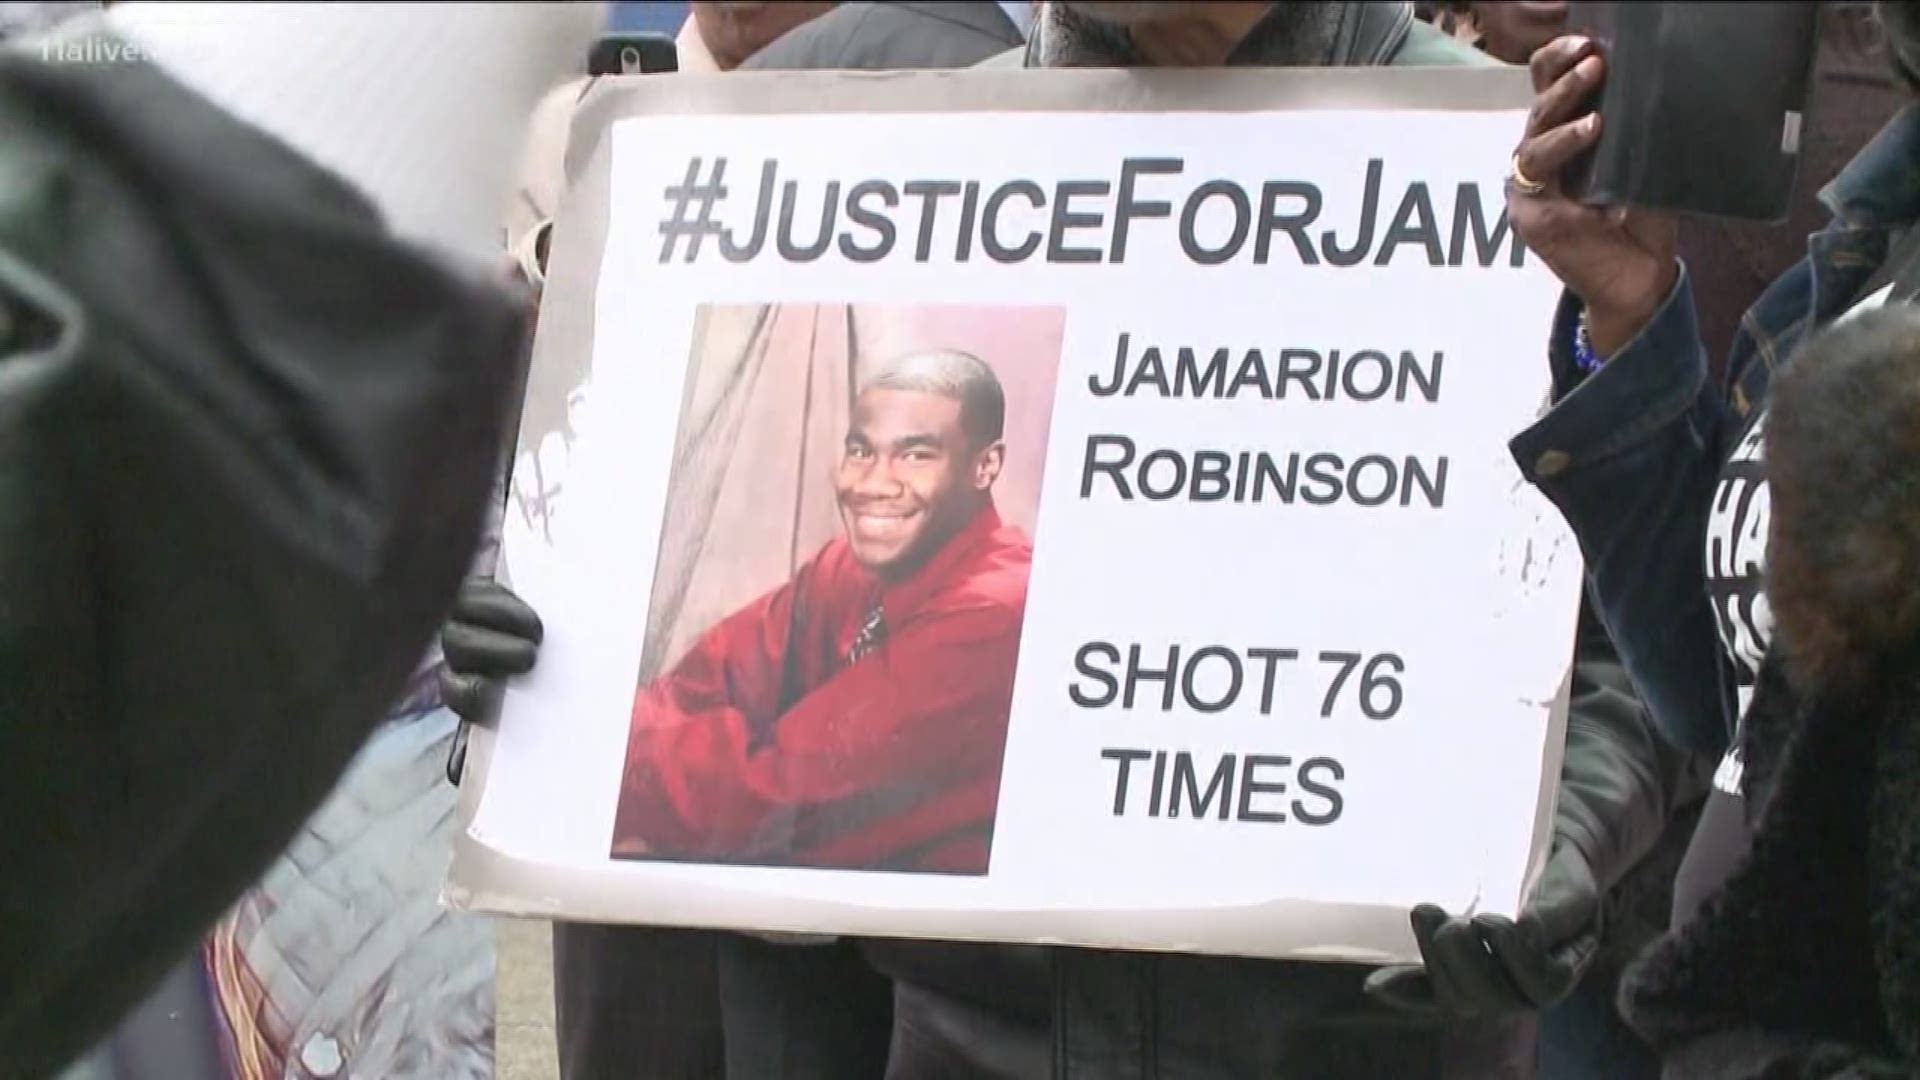 District Attorney Paul Howard is filing a civil lawsuit claiming the U.S. DOJ didn't prove the information he requested about the case of Jamarion Robinson - a man shot 76 times during an arrest attempt.